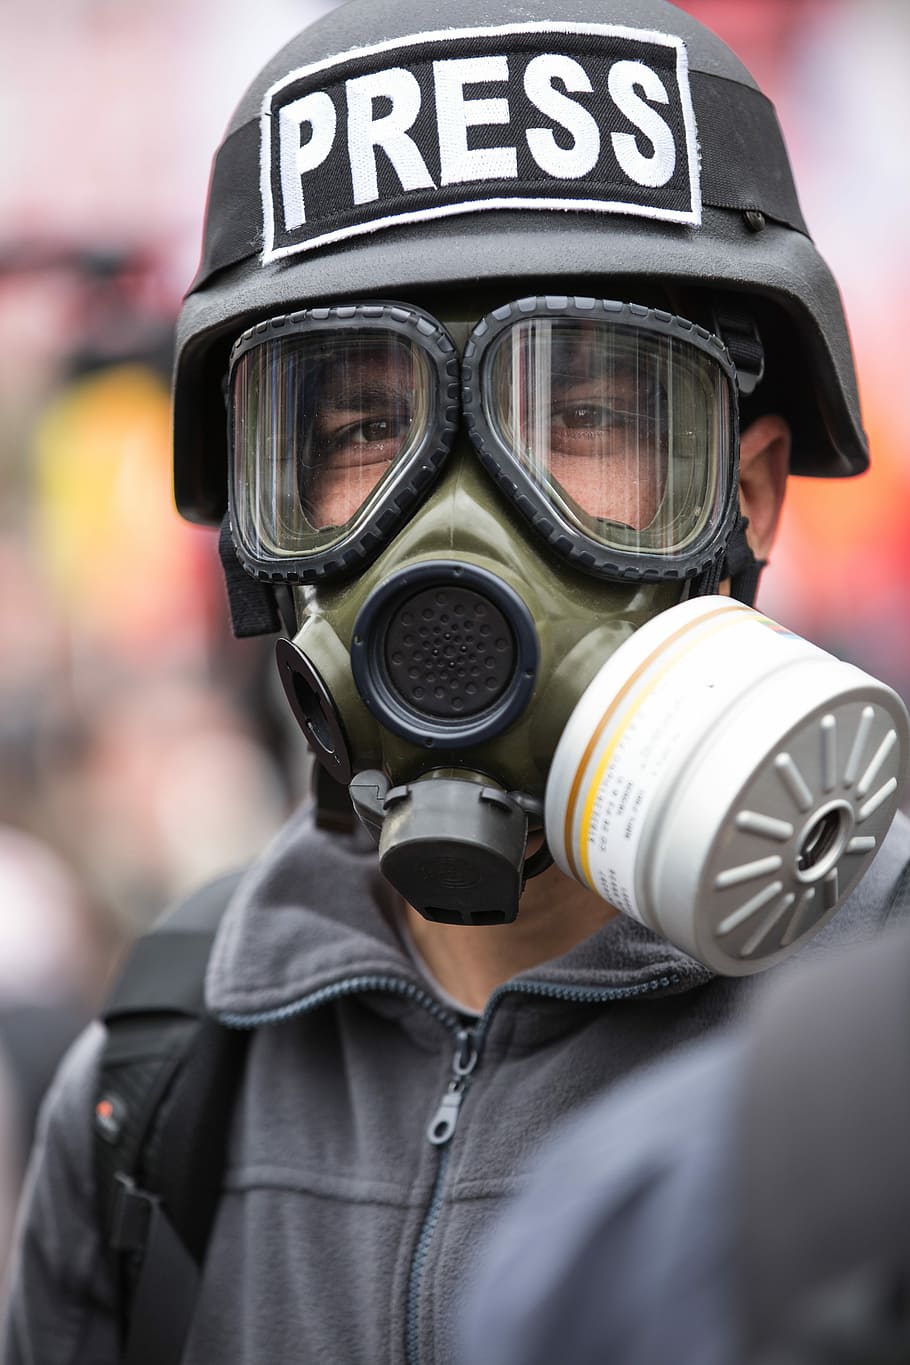 person wearing gas mask and black Press helmet, journalist, violence